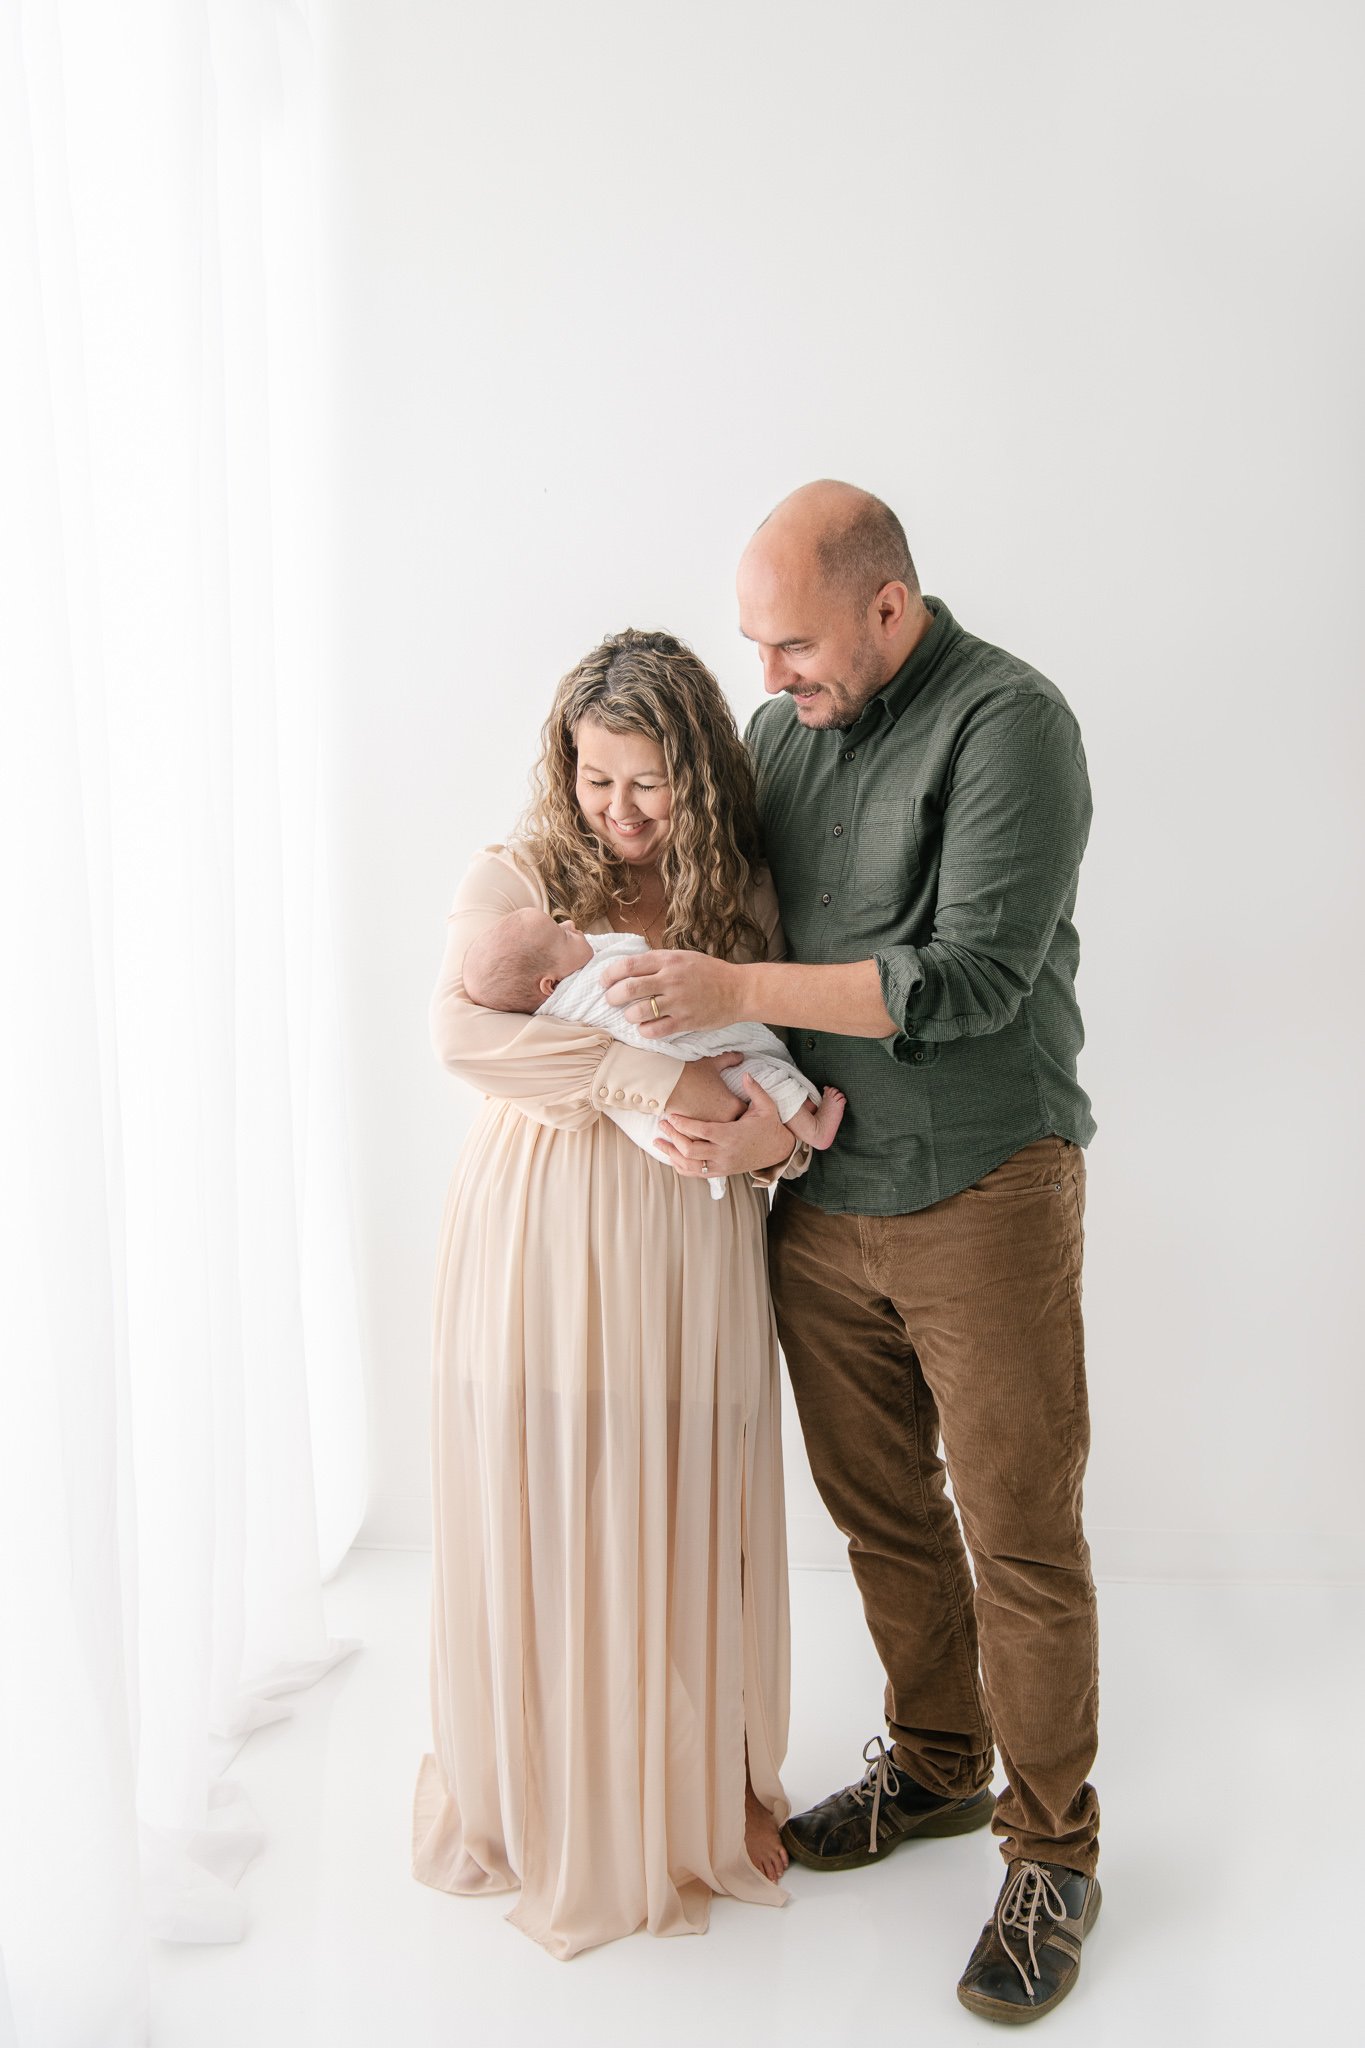  A father and mother look lovingly down at their newborn in a New Jersey studio family session with Nicole Hawkins Photography. three #NicoleHawkinsPhotography #NicoleHawkinsFamily #Newborns #MaplewoodNJ #studiofamilyportraits #modernfamilyportraits 